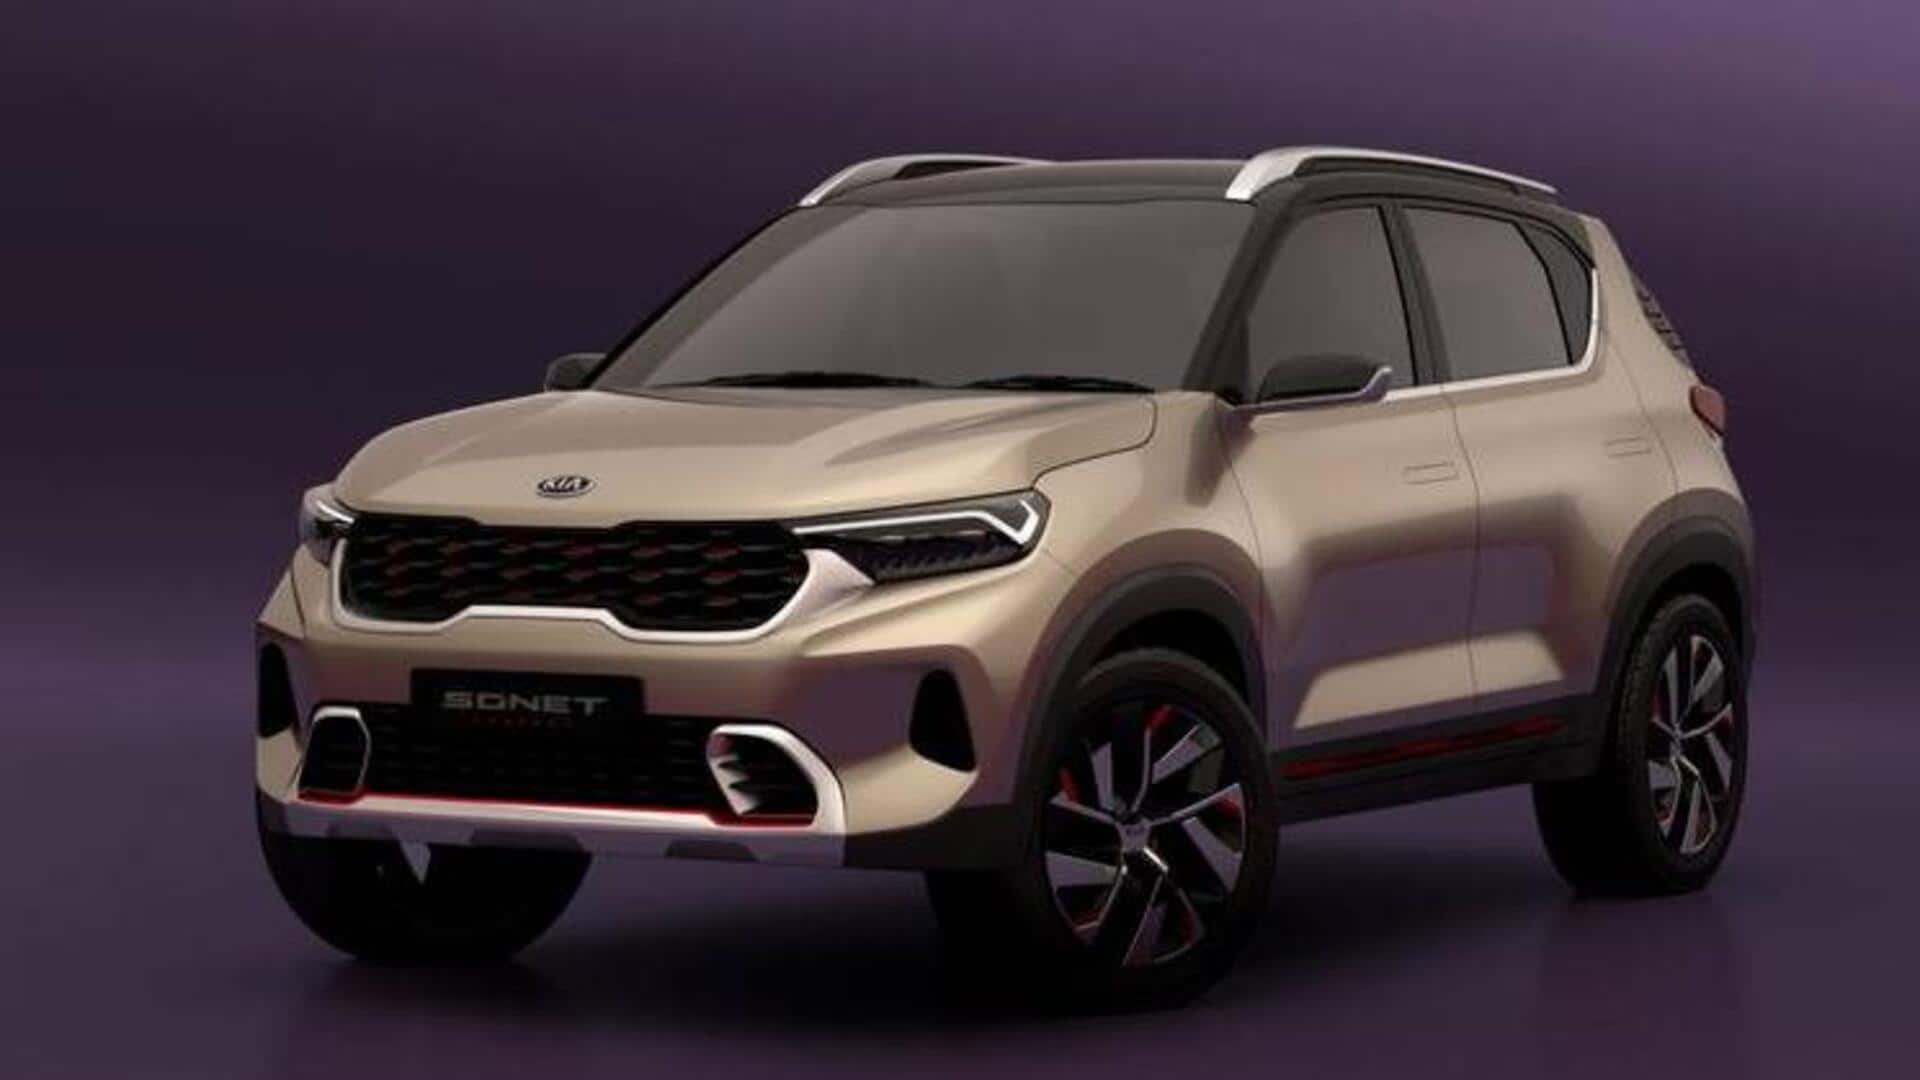 Kia Sonet (facelift) in works: Check expected features